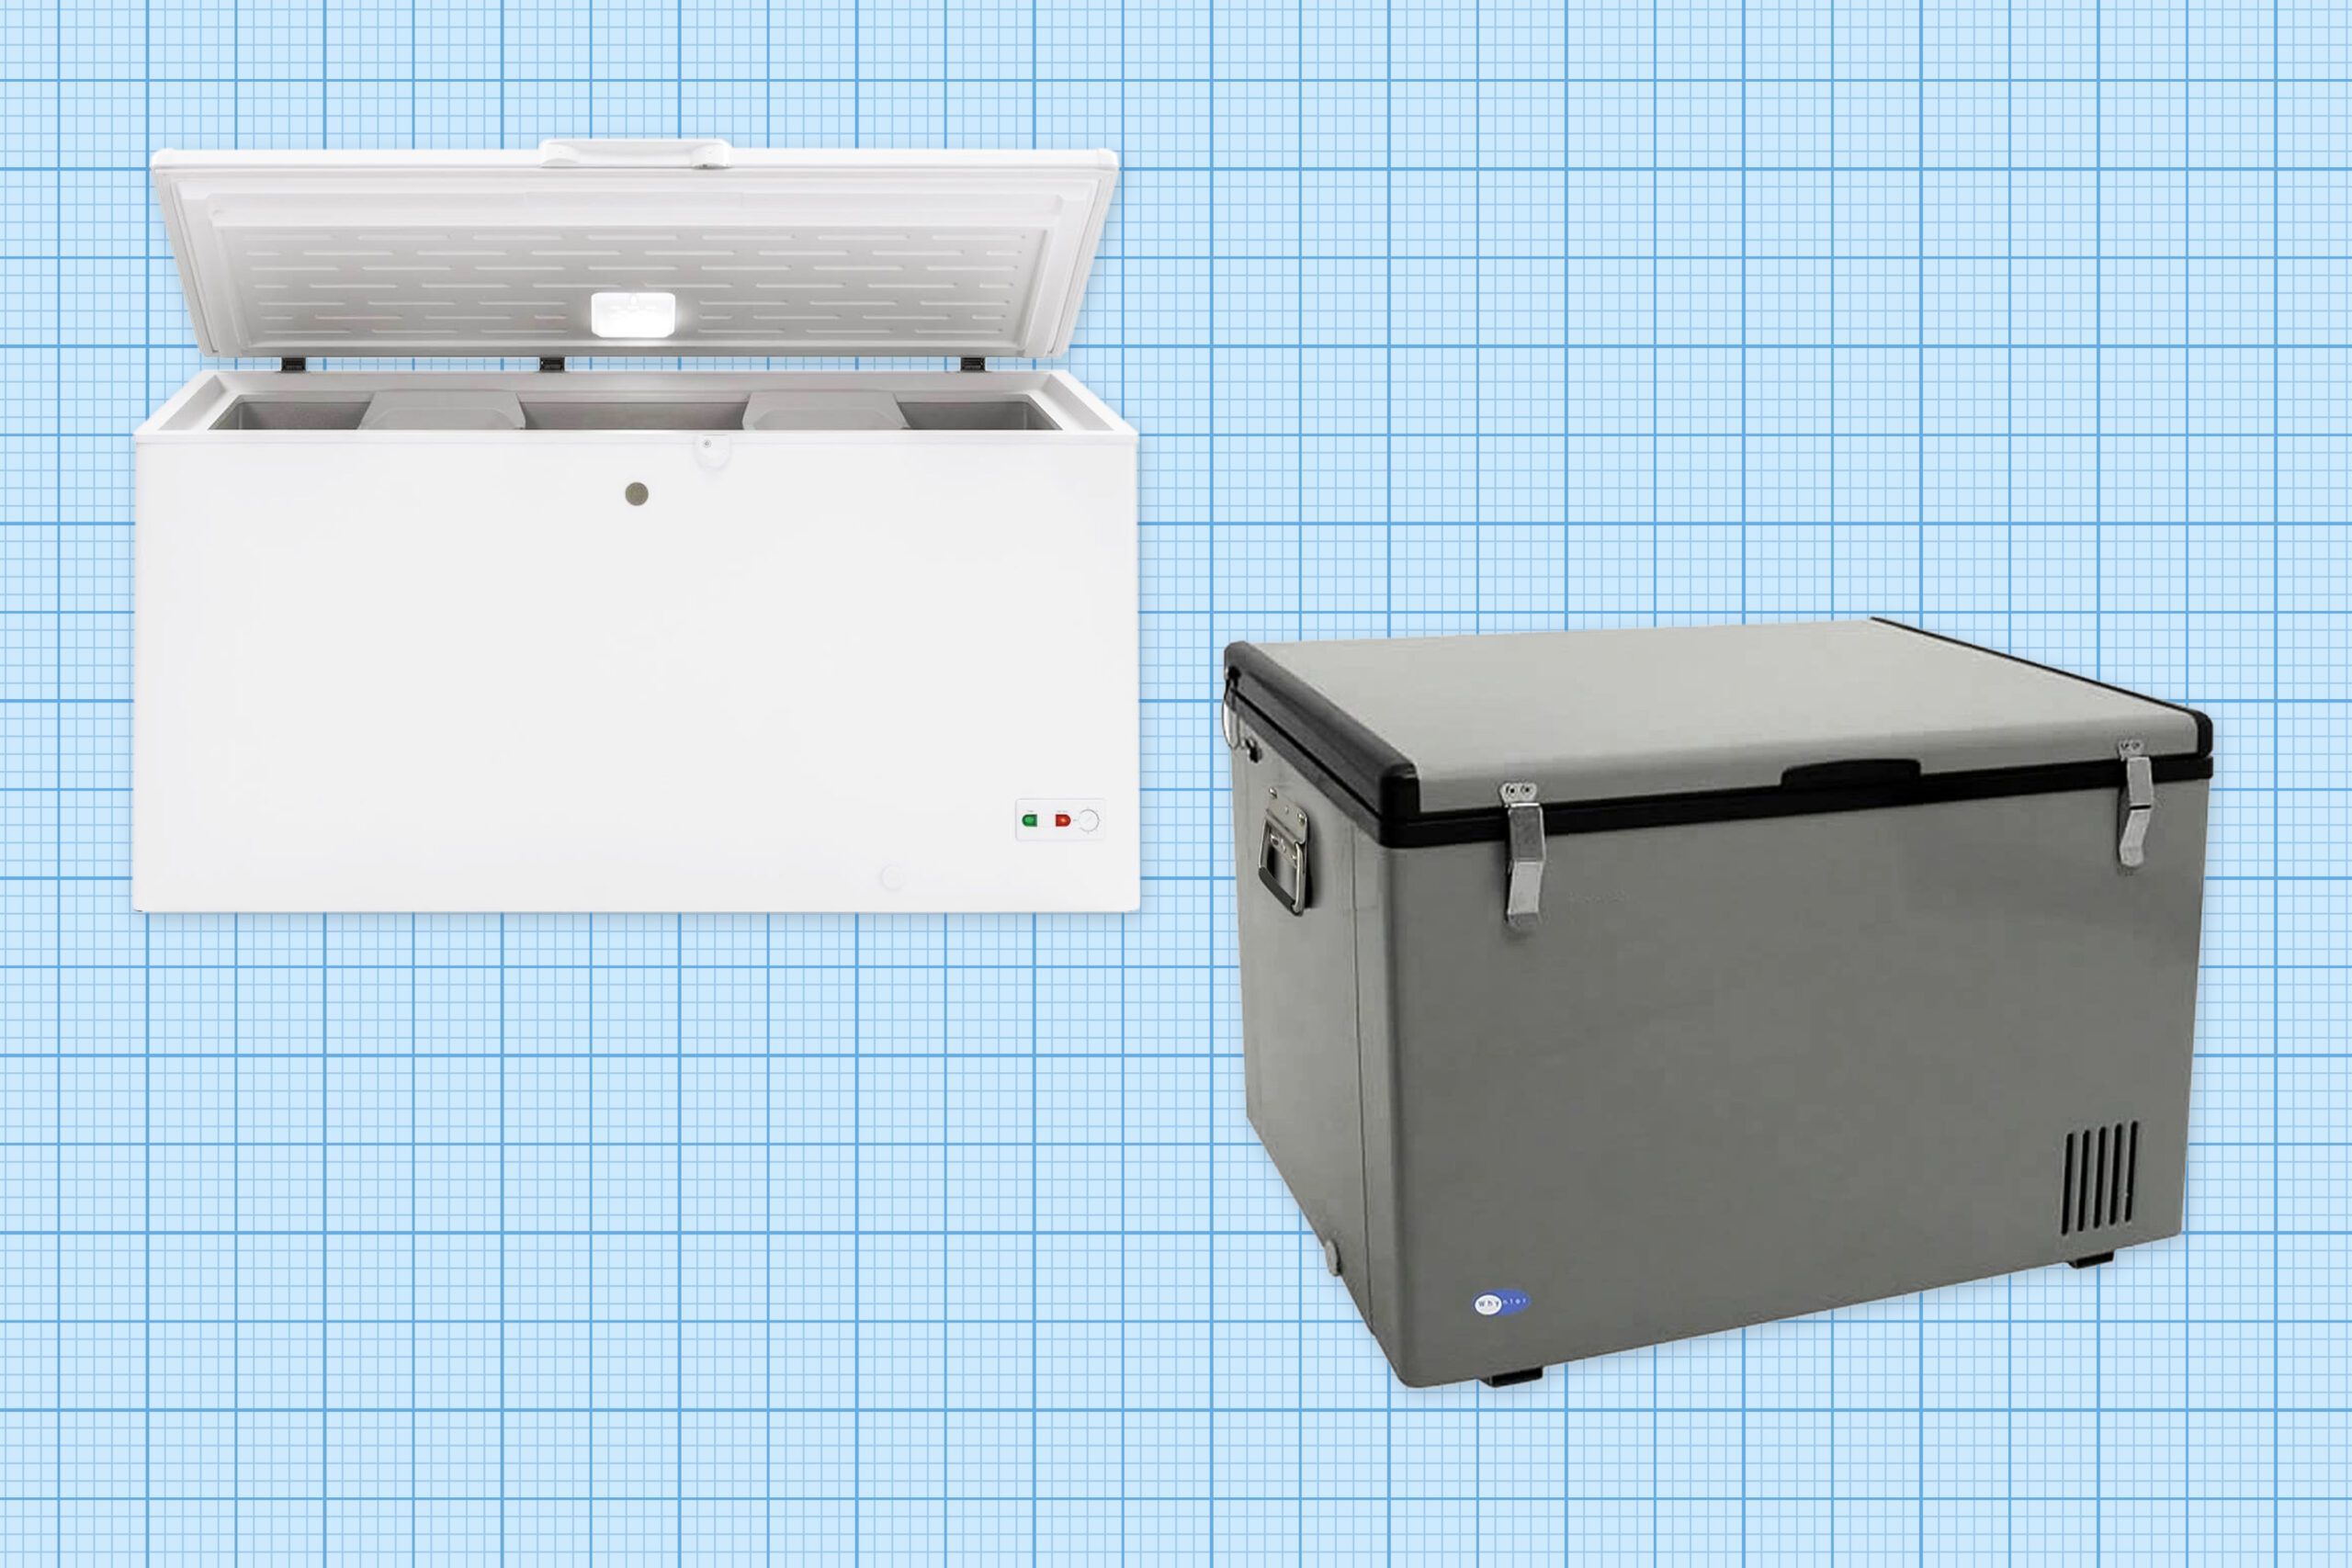 White and gray chest freezers against a blue graph paper background. Lead image for best chest freezers guide.